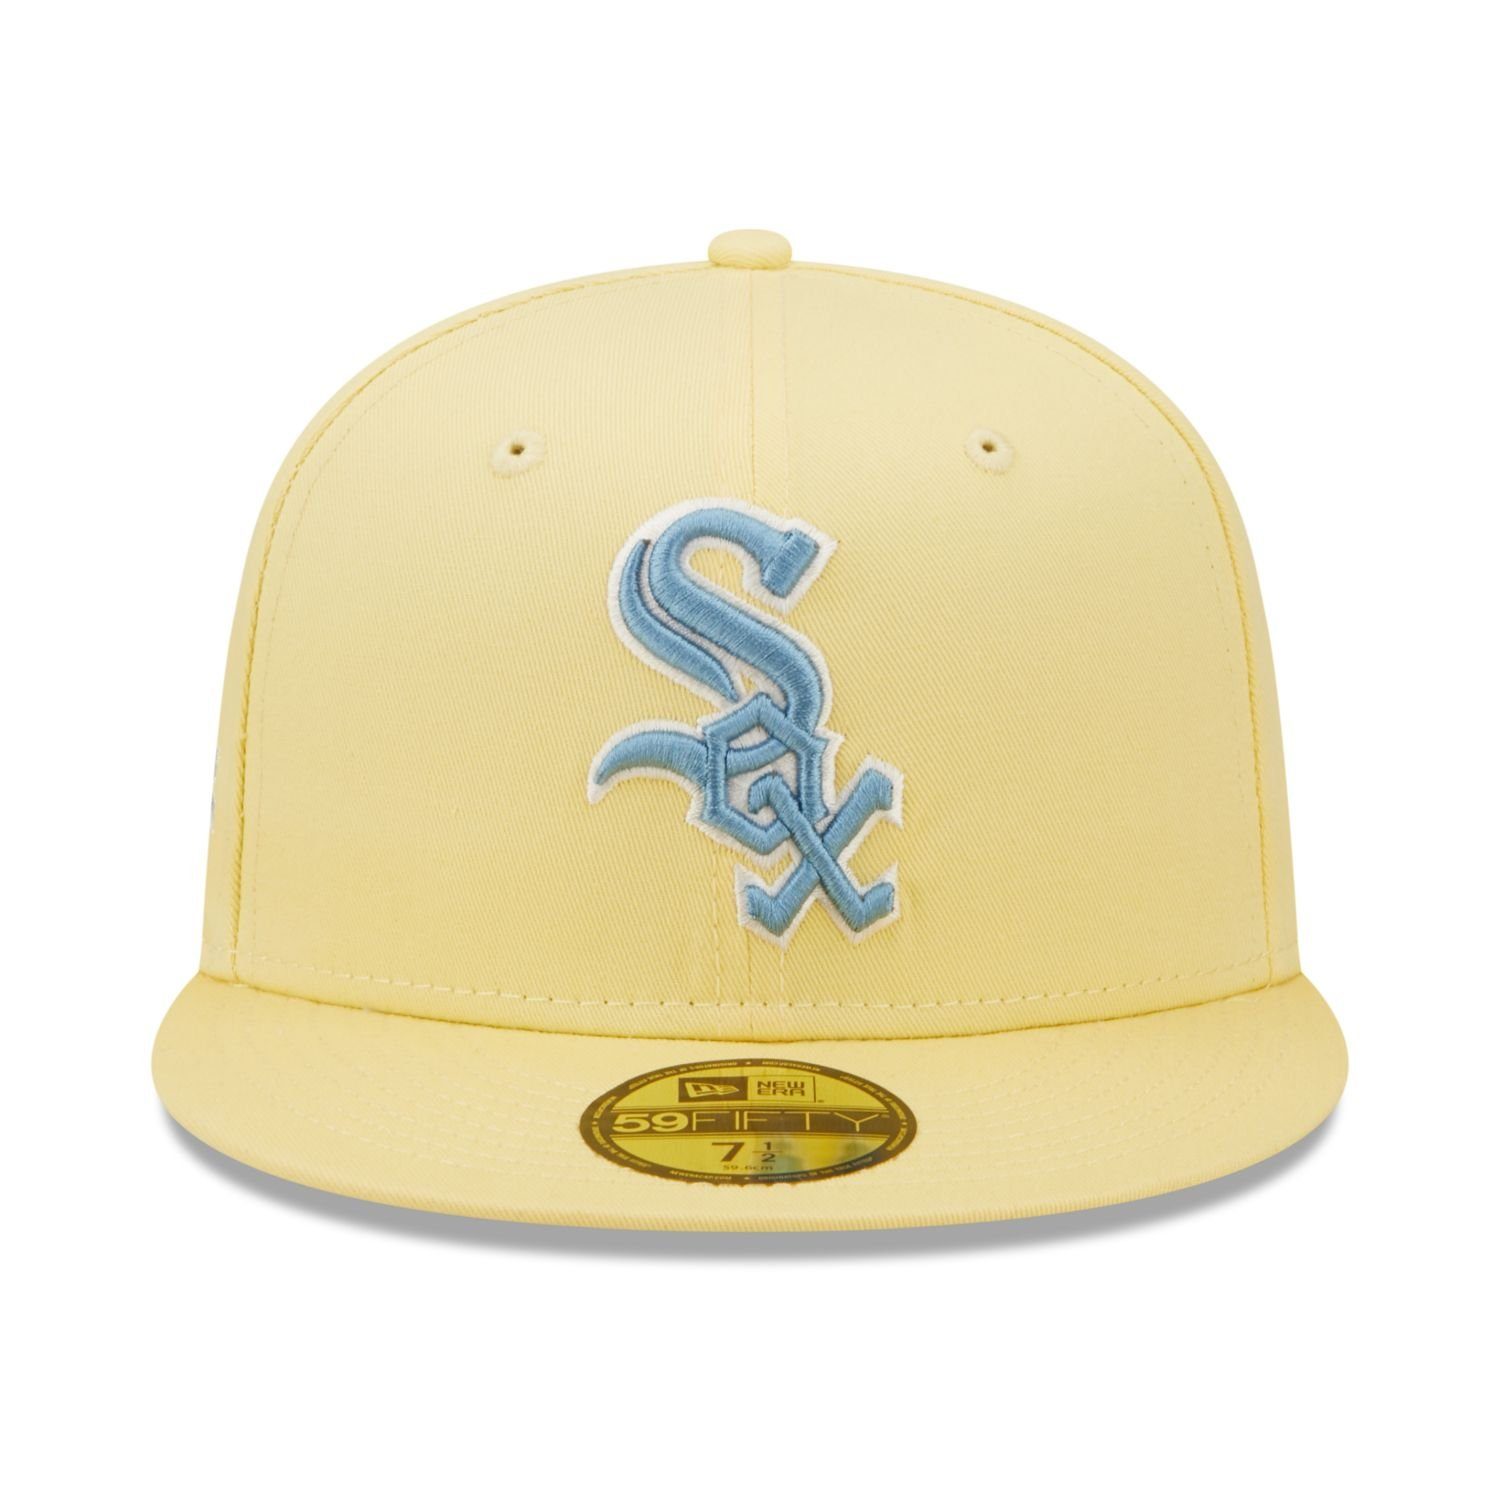 White Era New Fitted Cap Chicago COOPERSTOWN 59Fifty Sox